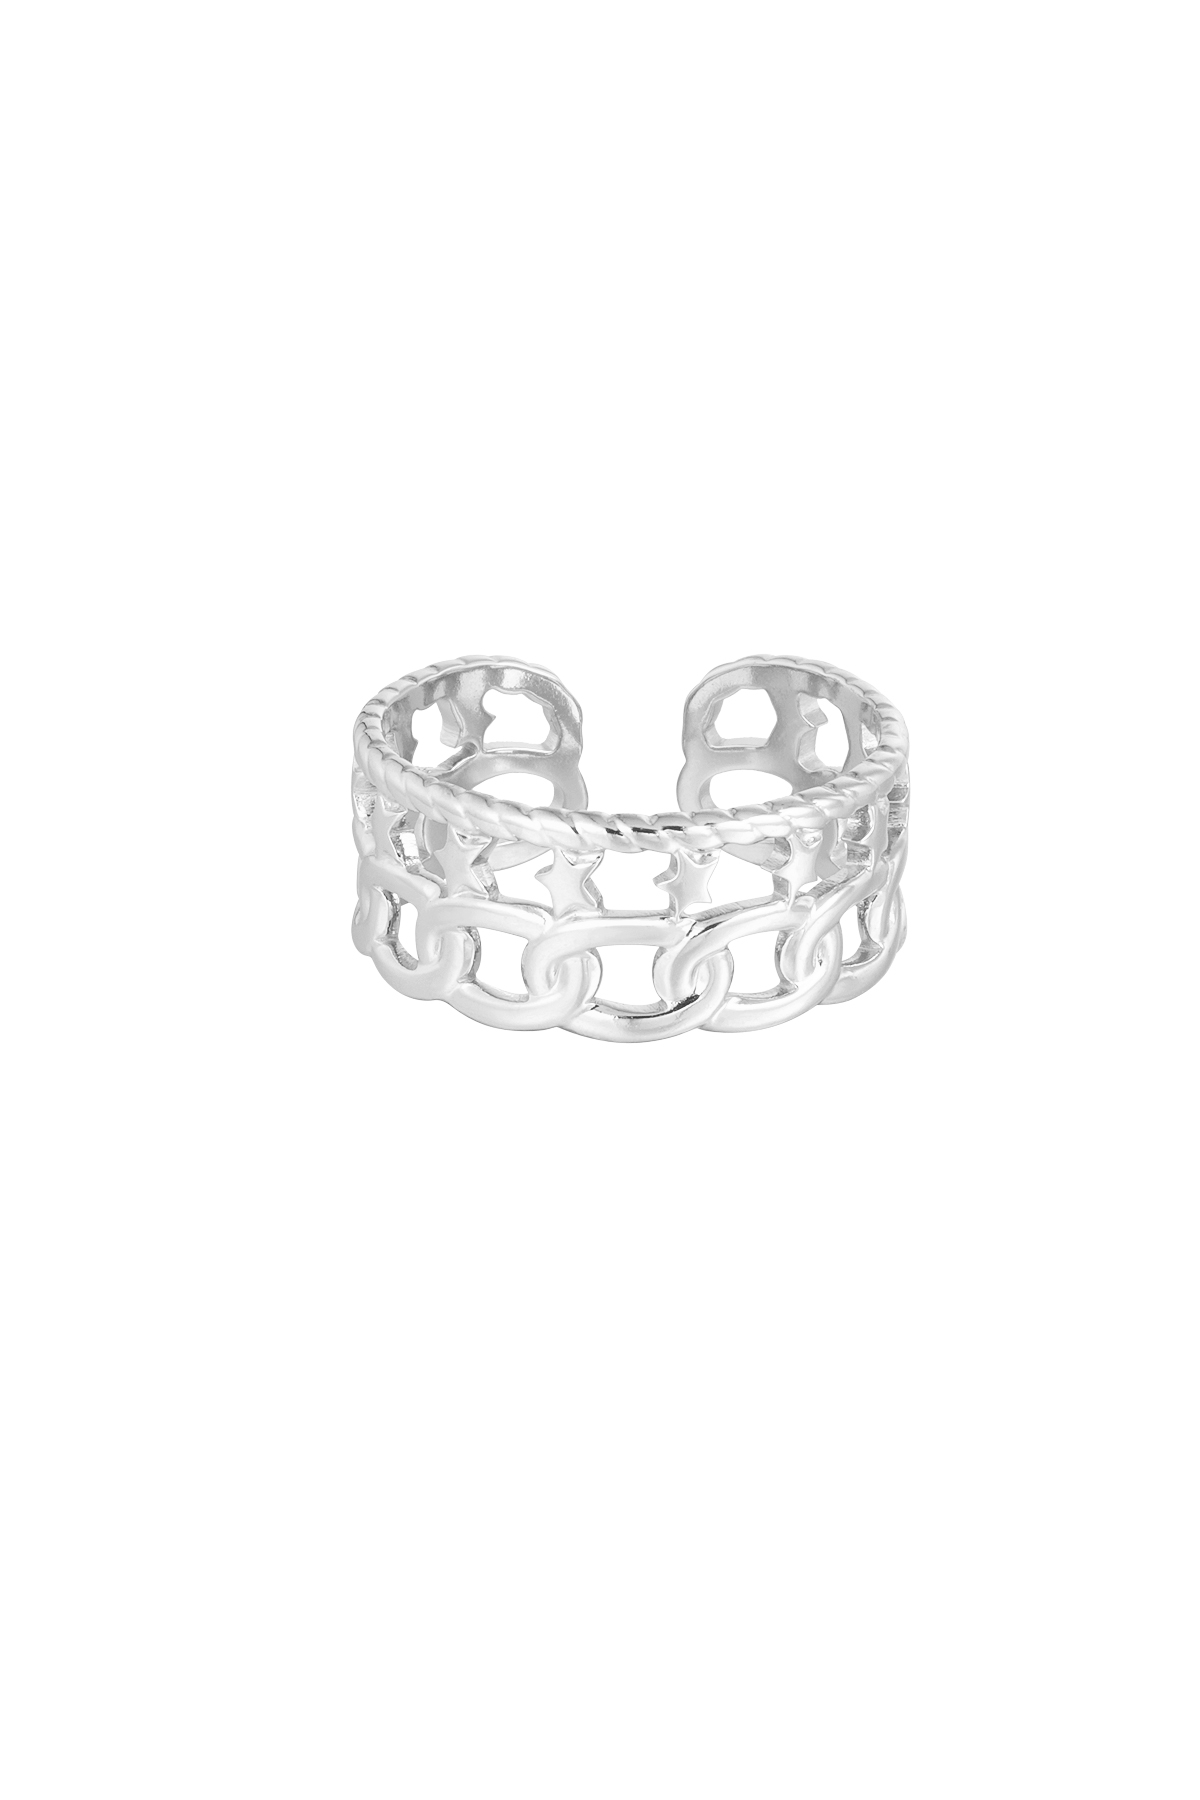 Ring links/stars - silver h5 